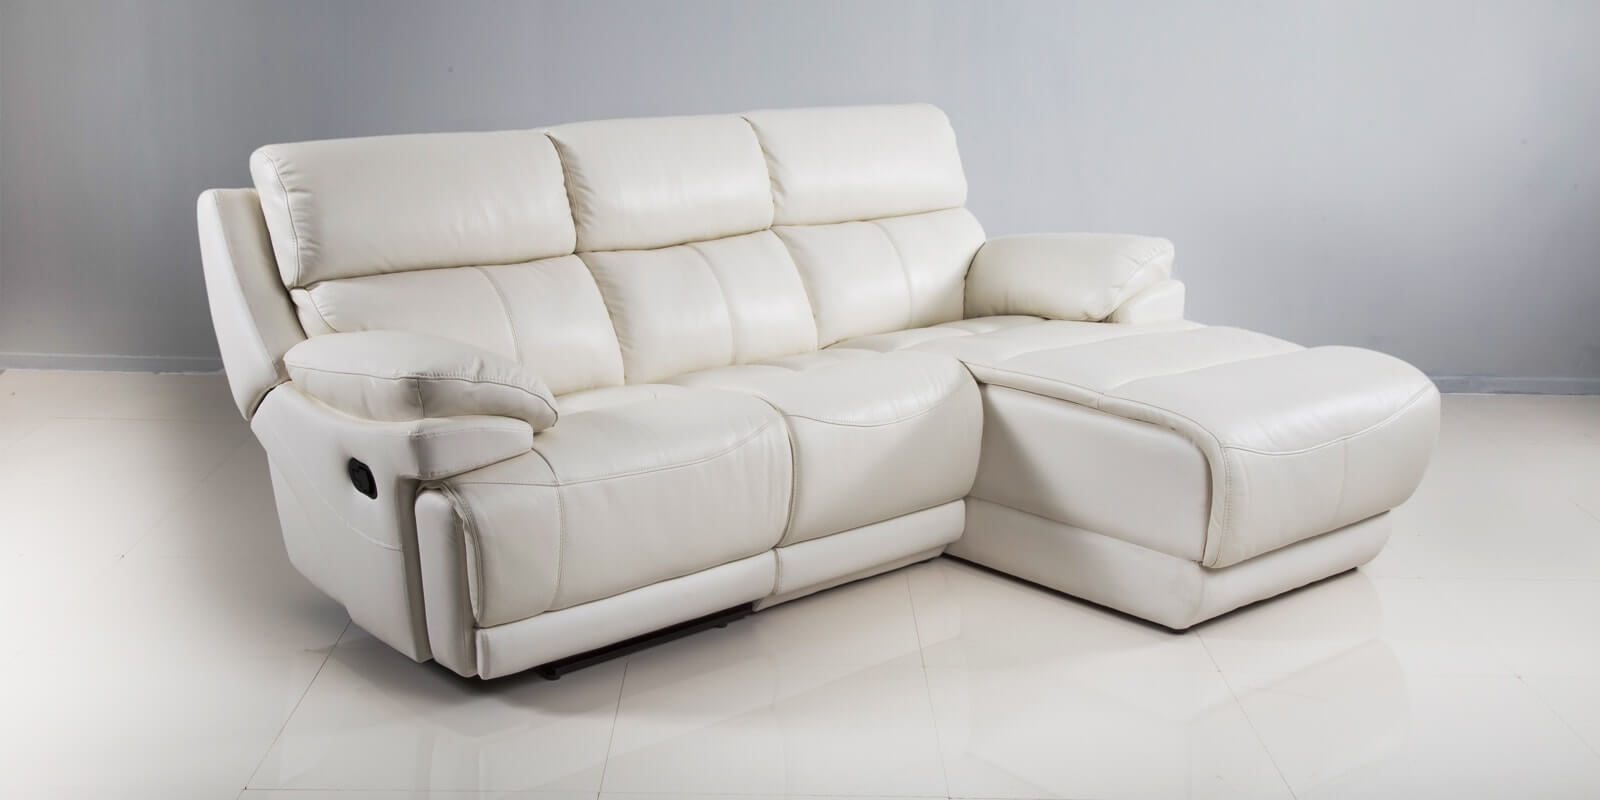 leather sofa manufacturer ratings